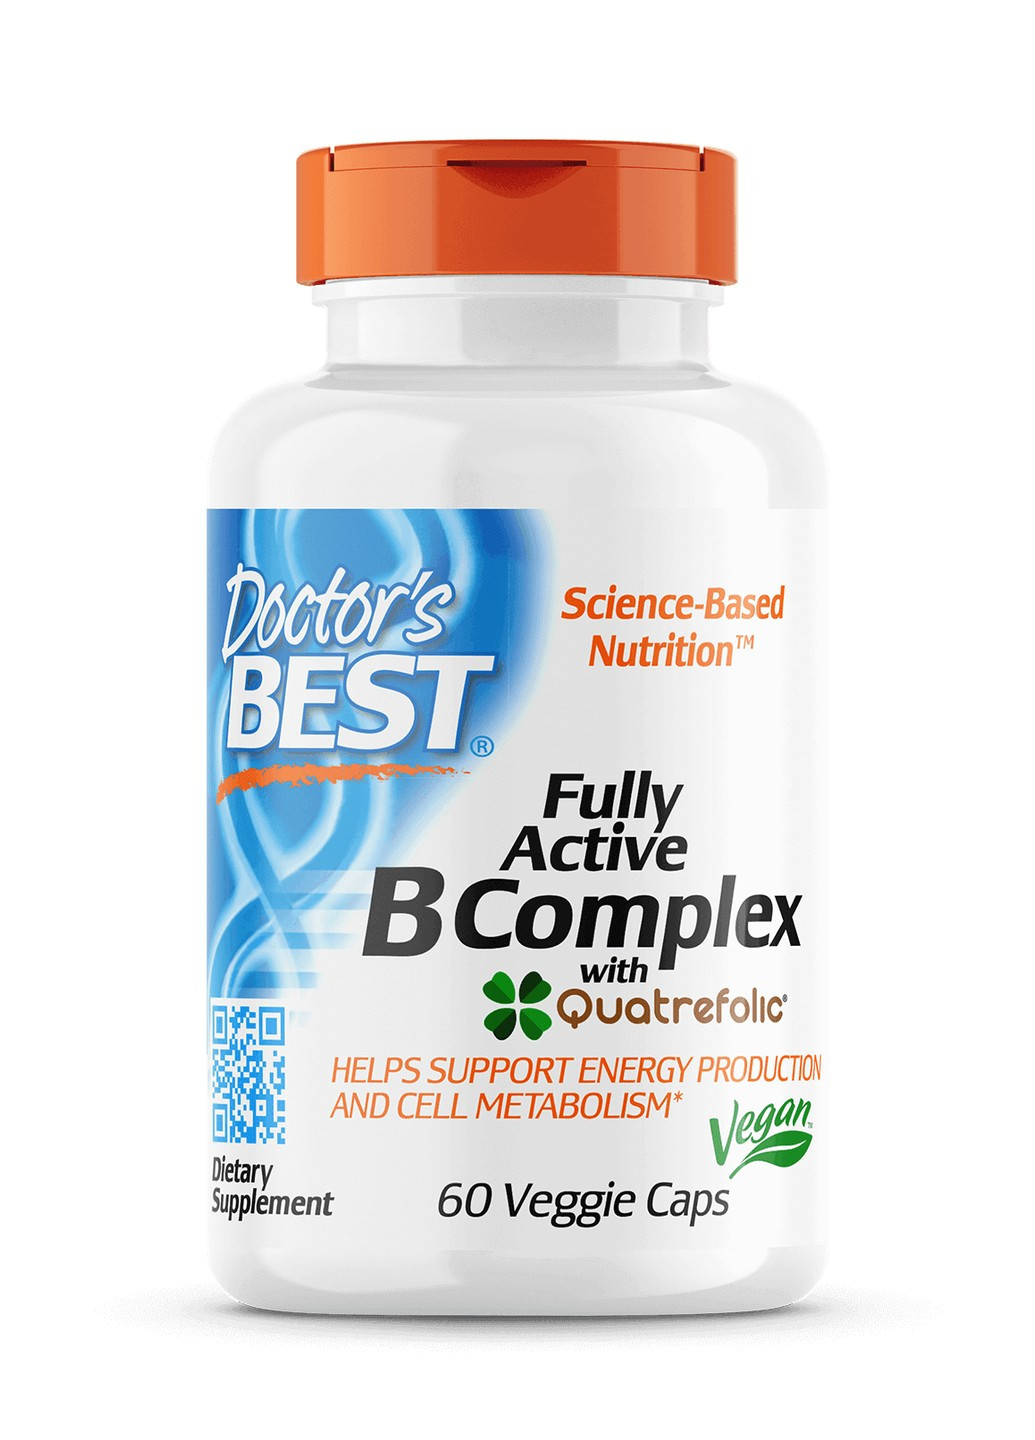 B-Комплекс, Fully Active B Complex,, 60 гелевих капсул Doctor's Best (255409011)